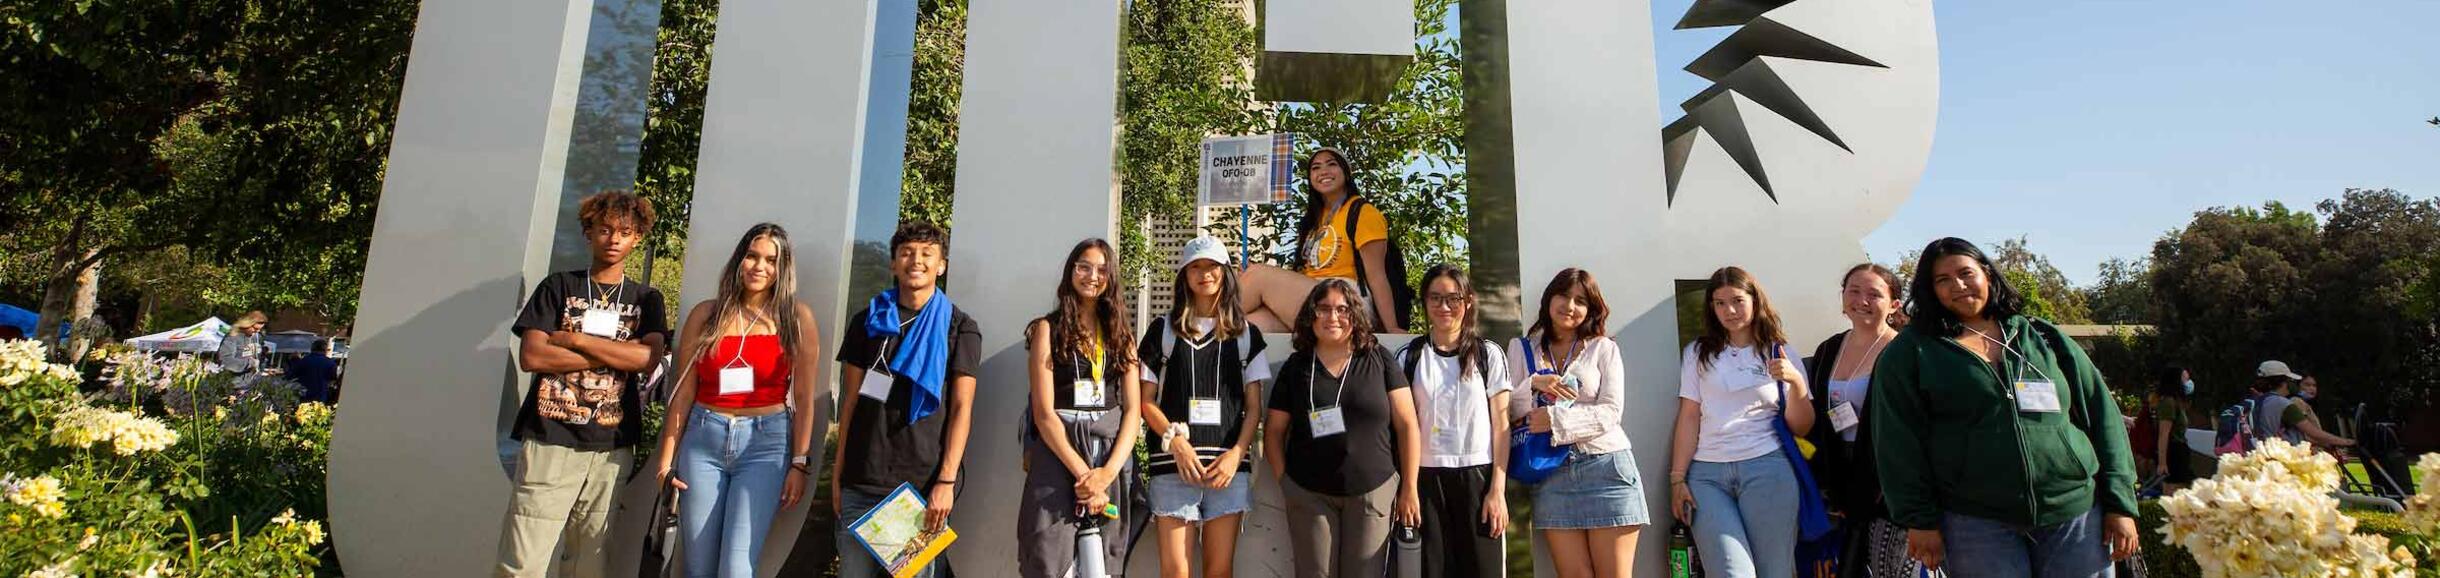 Students during Orientation in front of the UCR sign